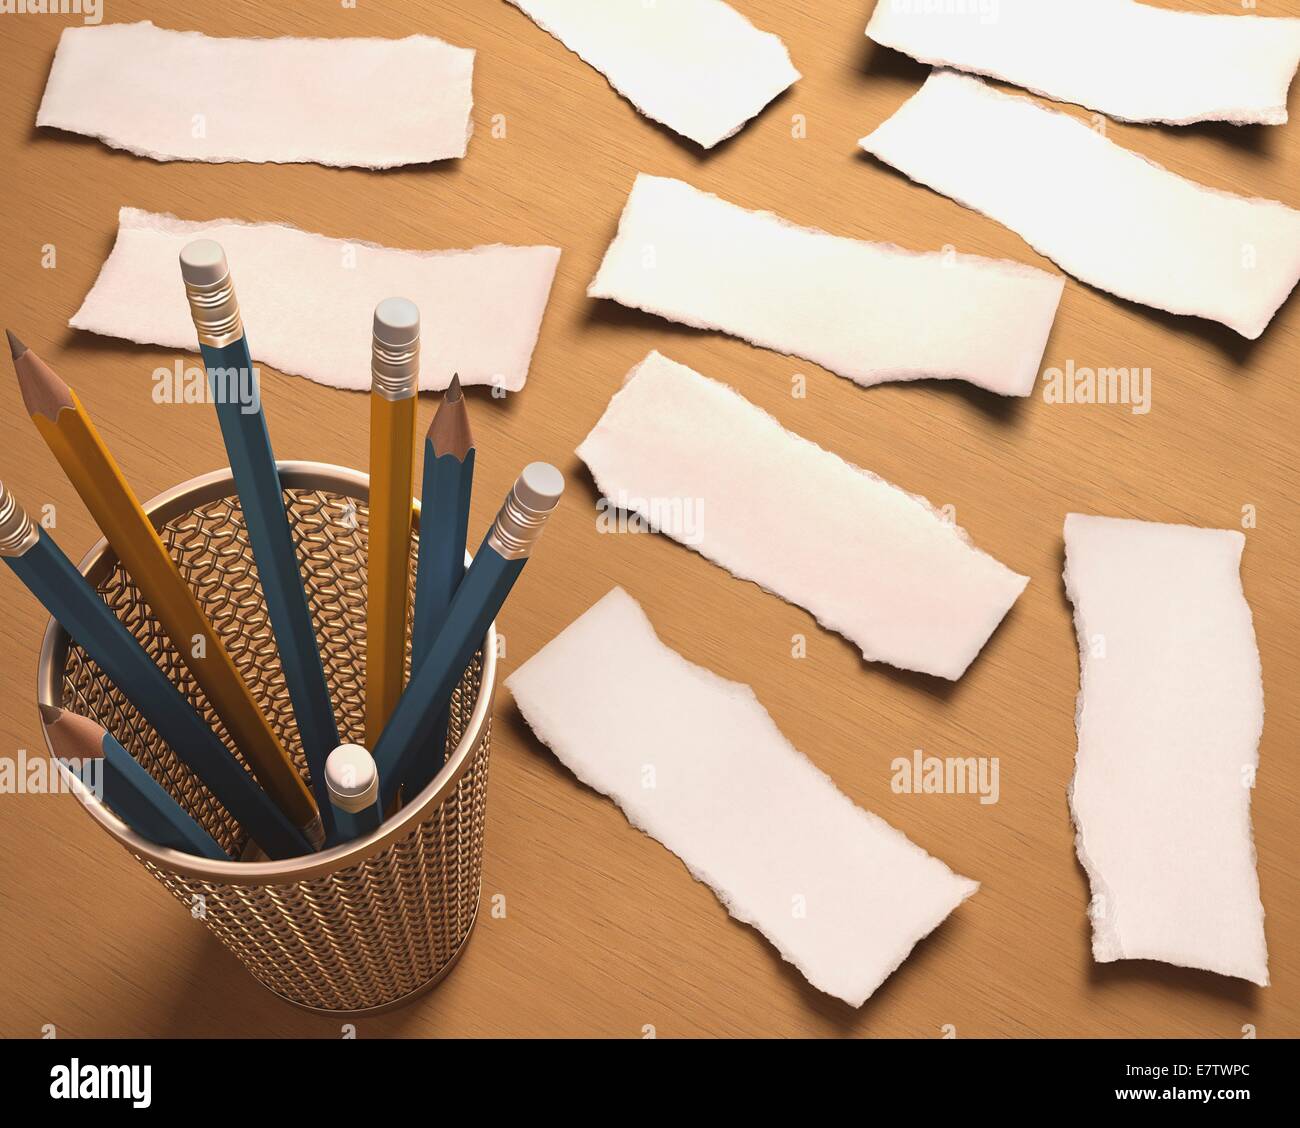 Blank pieces of paper and a pot of pencils, computer artwork. Stock Photo